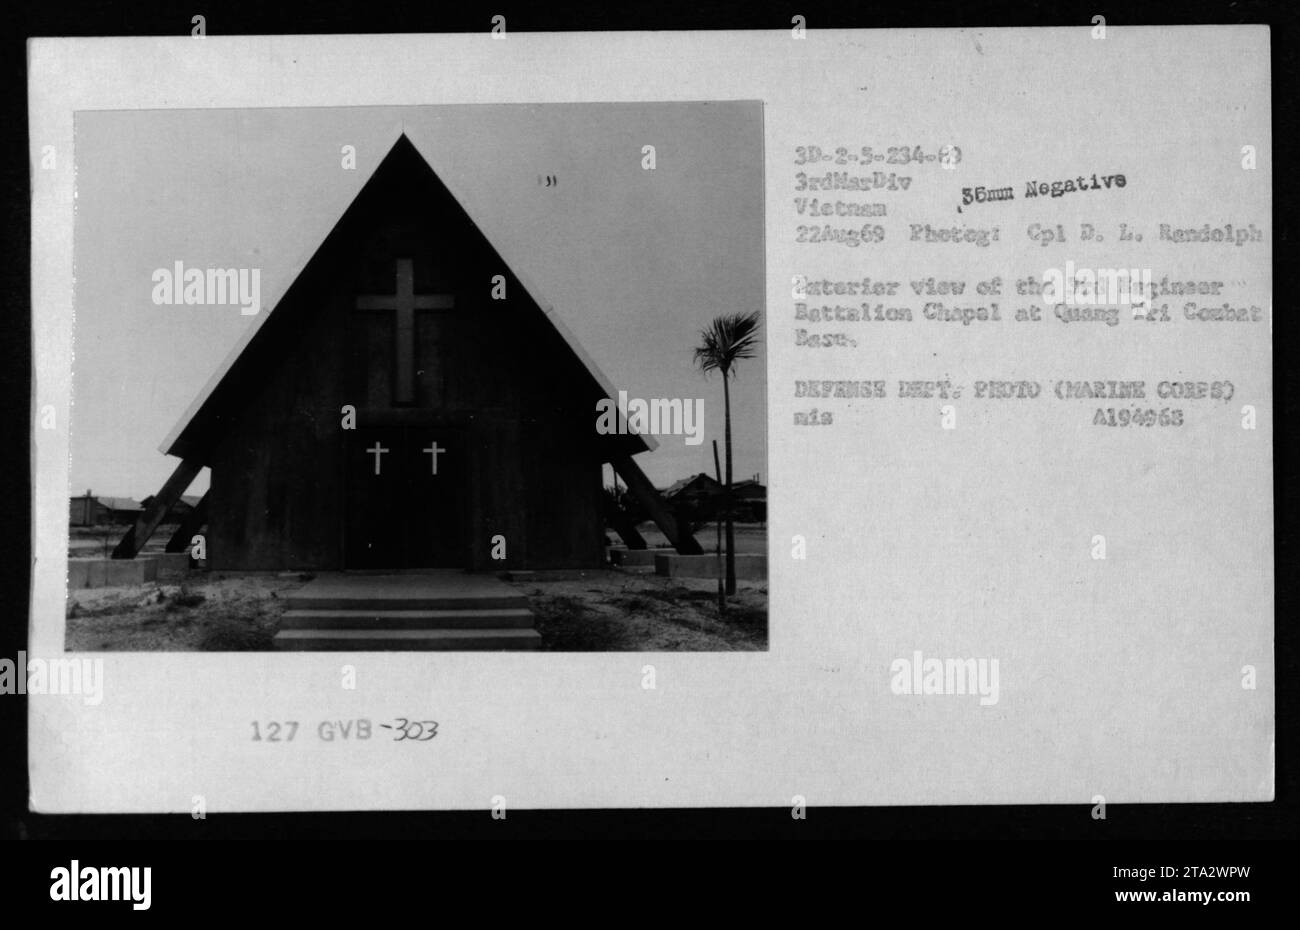 Exterior view of the 3rd Engineer Battalion Chapel at Quang Tri Combat Base in Vietnam. The photograph, taken on August 22, 1969, captures the architecture of the chapel and its surroundings. This image is part of a collection documenting American military activities during the Vietnam War. Stock Photo